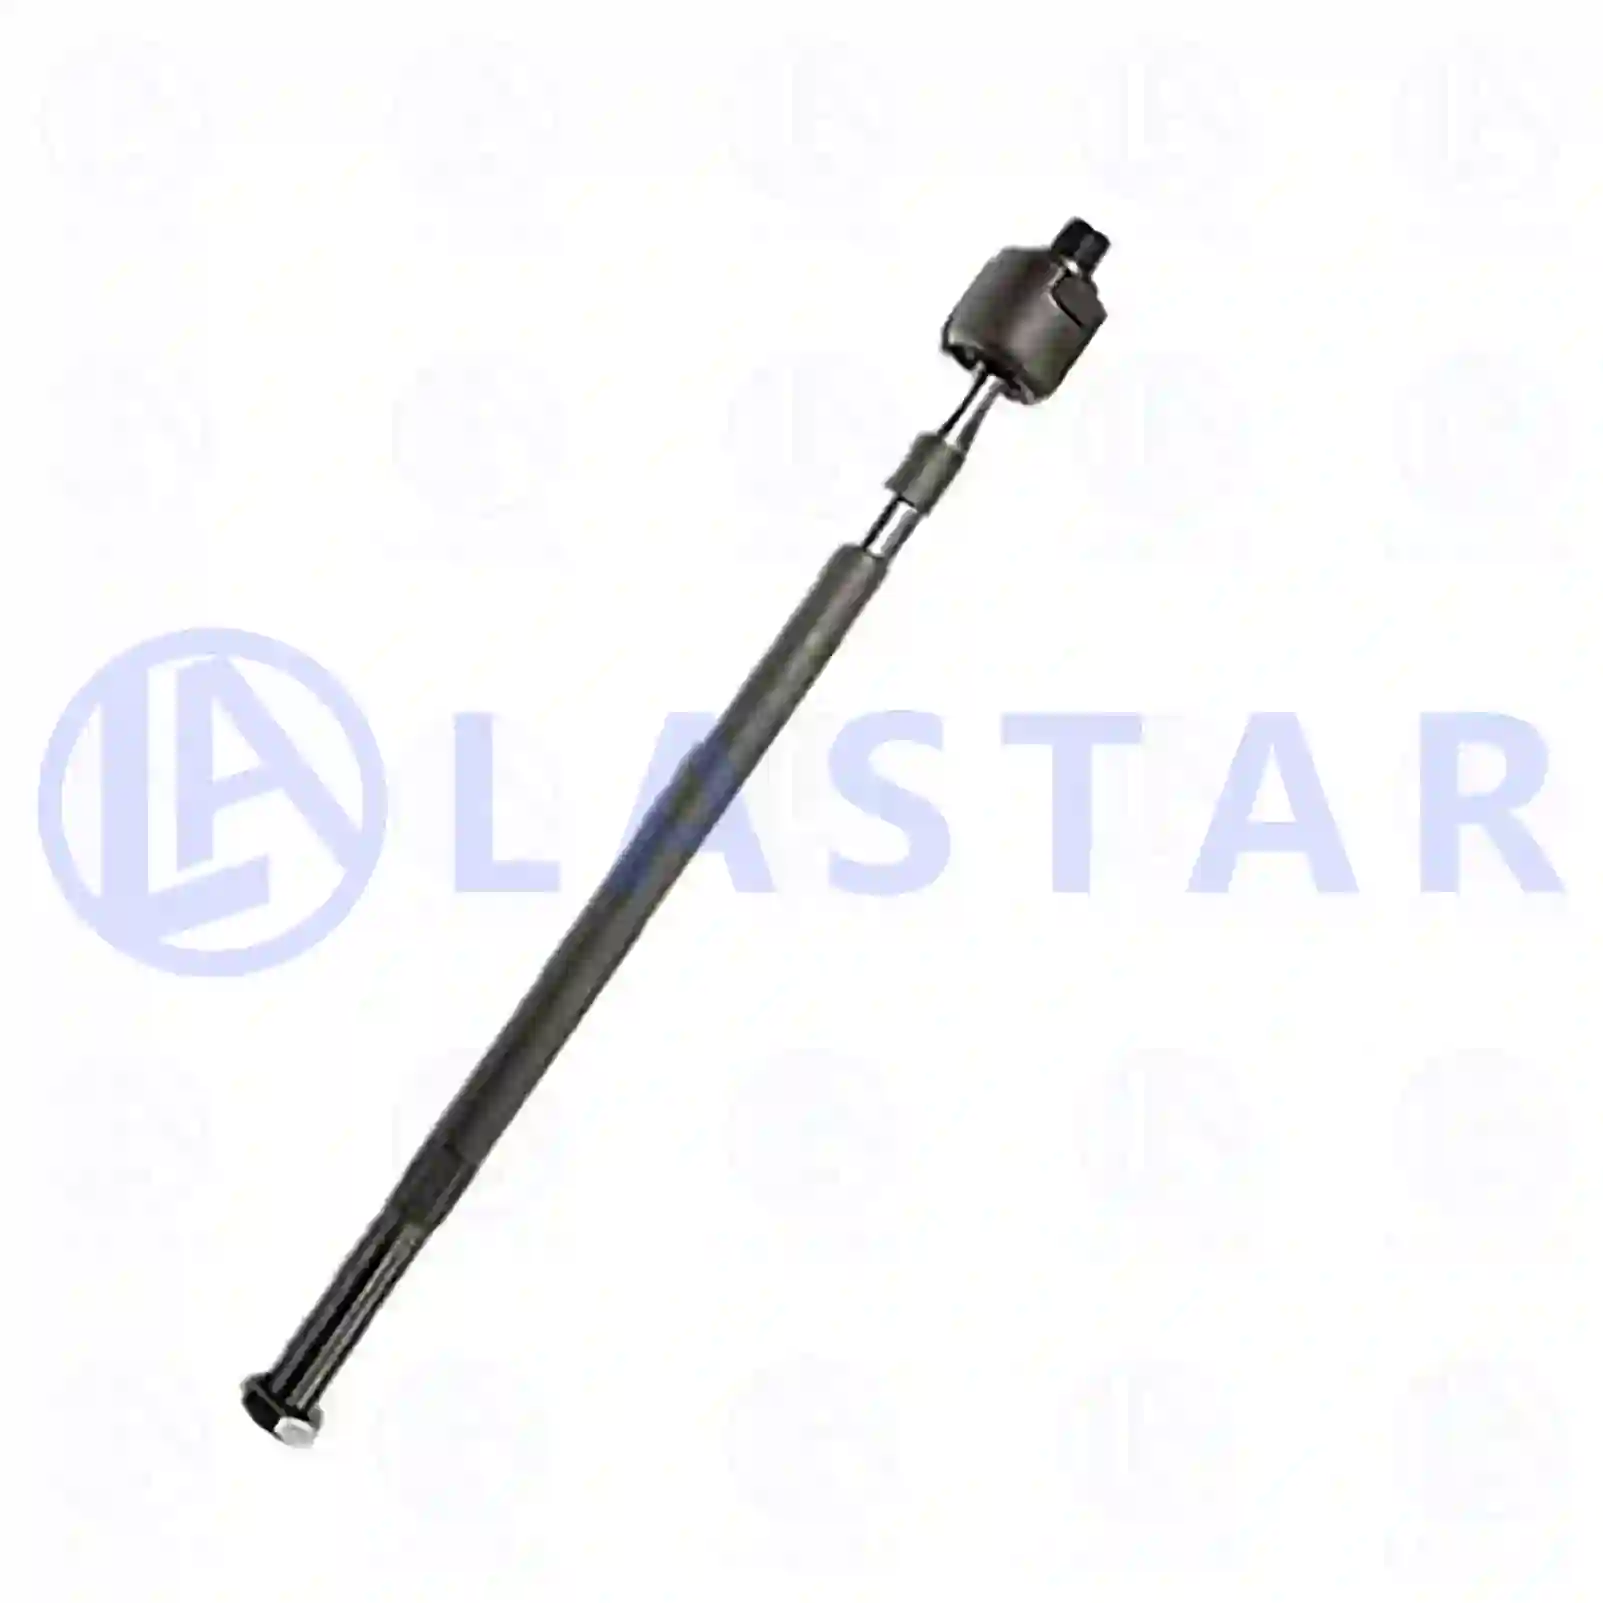 Axle joint, Track rod, 77730316, 6156463, 6197402, 6869951, 92VB-2L519-AA, 92VB-2L519-AB ||  77730316 Lastar Spare Part | Truck Spare Parts, Auotomotive Spare Parts Axle joint, Track rod, 77730316, 6156463, 6197402, 6869951, 92VB-2L519-AA, 92VB-2L519-AB ||  77730316 Lastar Spare Part | Truck Spare Parts, Auotomotive Spare Parts